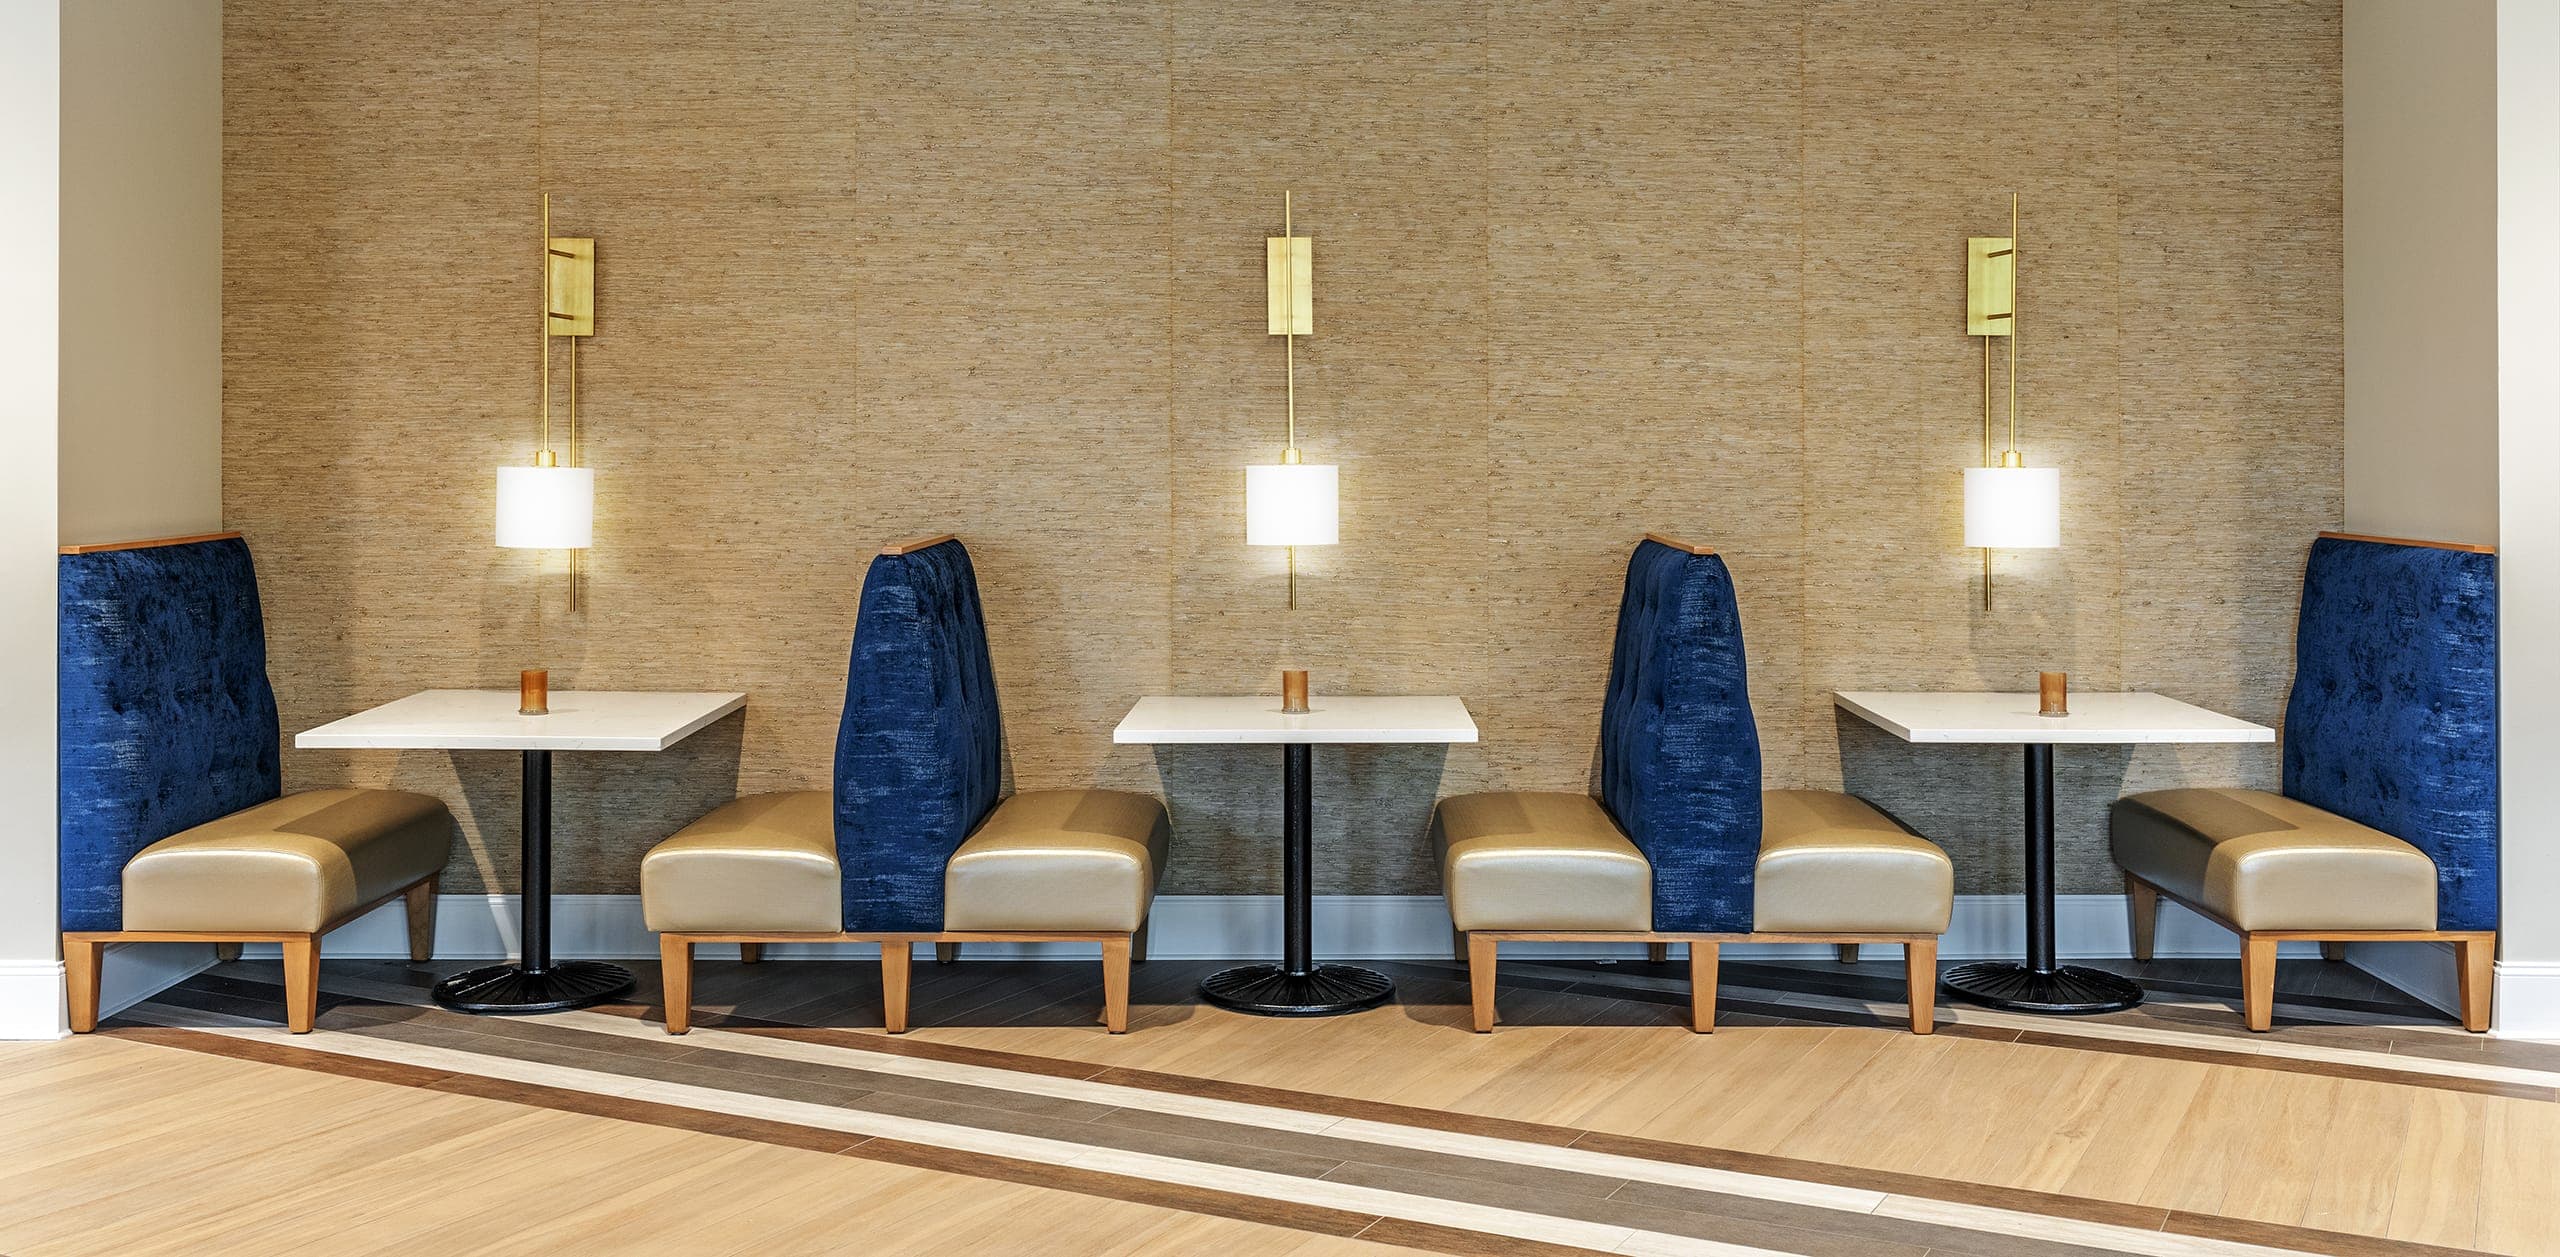 Resturant Dining Area Gold Wall Mounted Lamps Blue Satin Booth Seats Caramel Seats